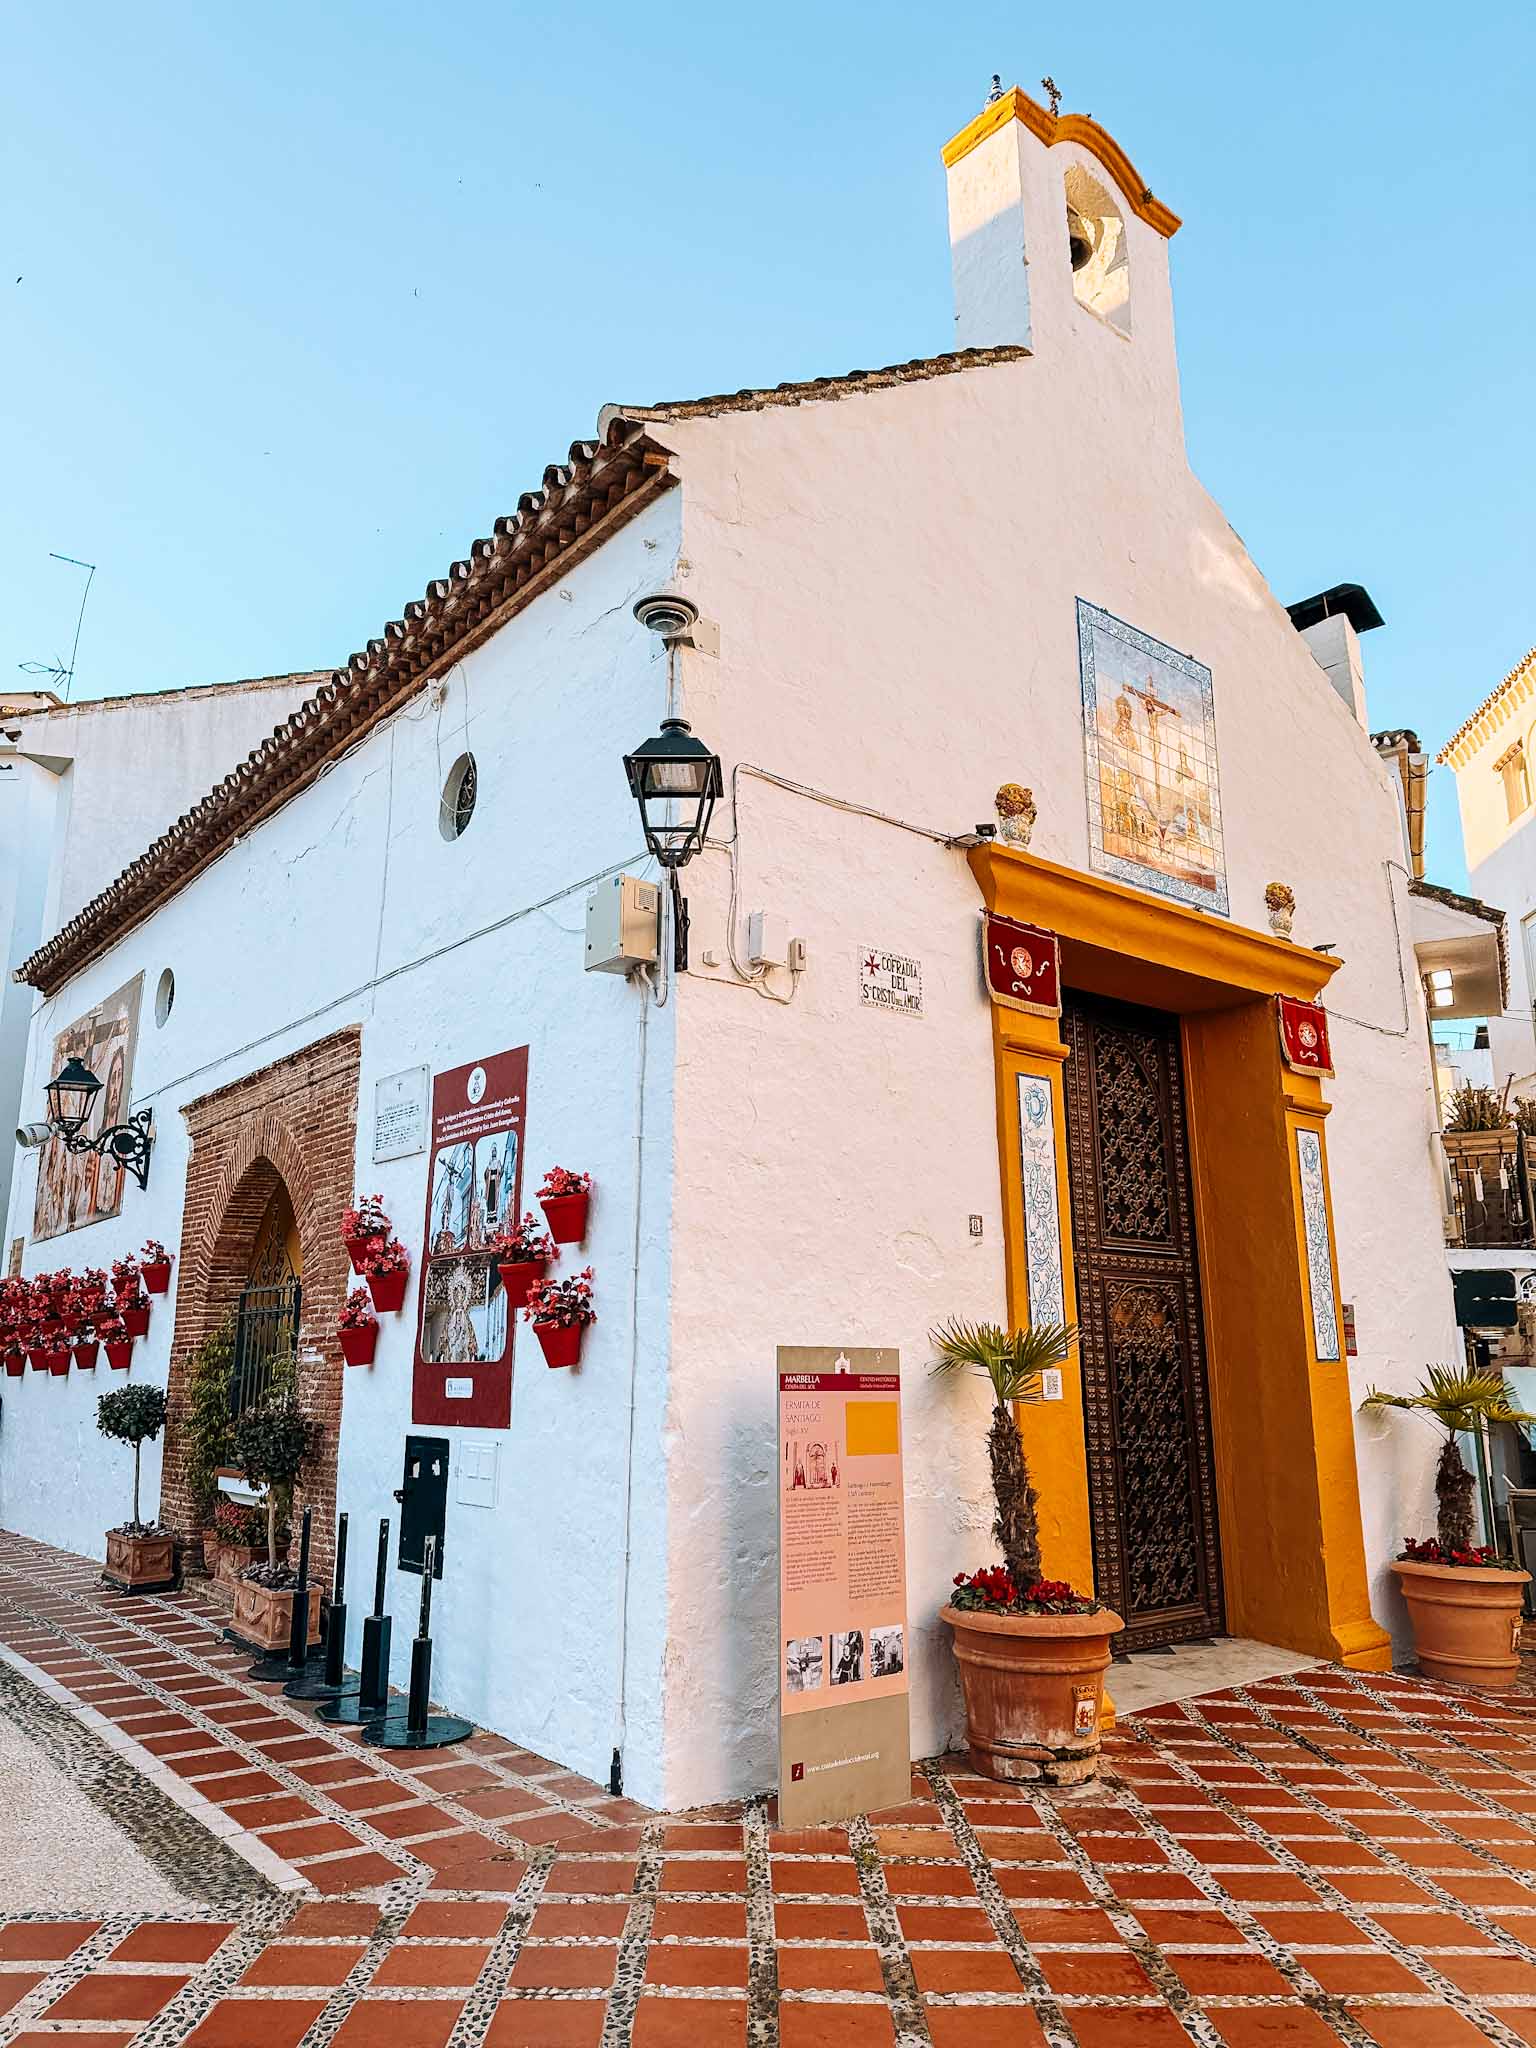 Best Instagram photo spots and things to do in Marbella Old Town, Spain